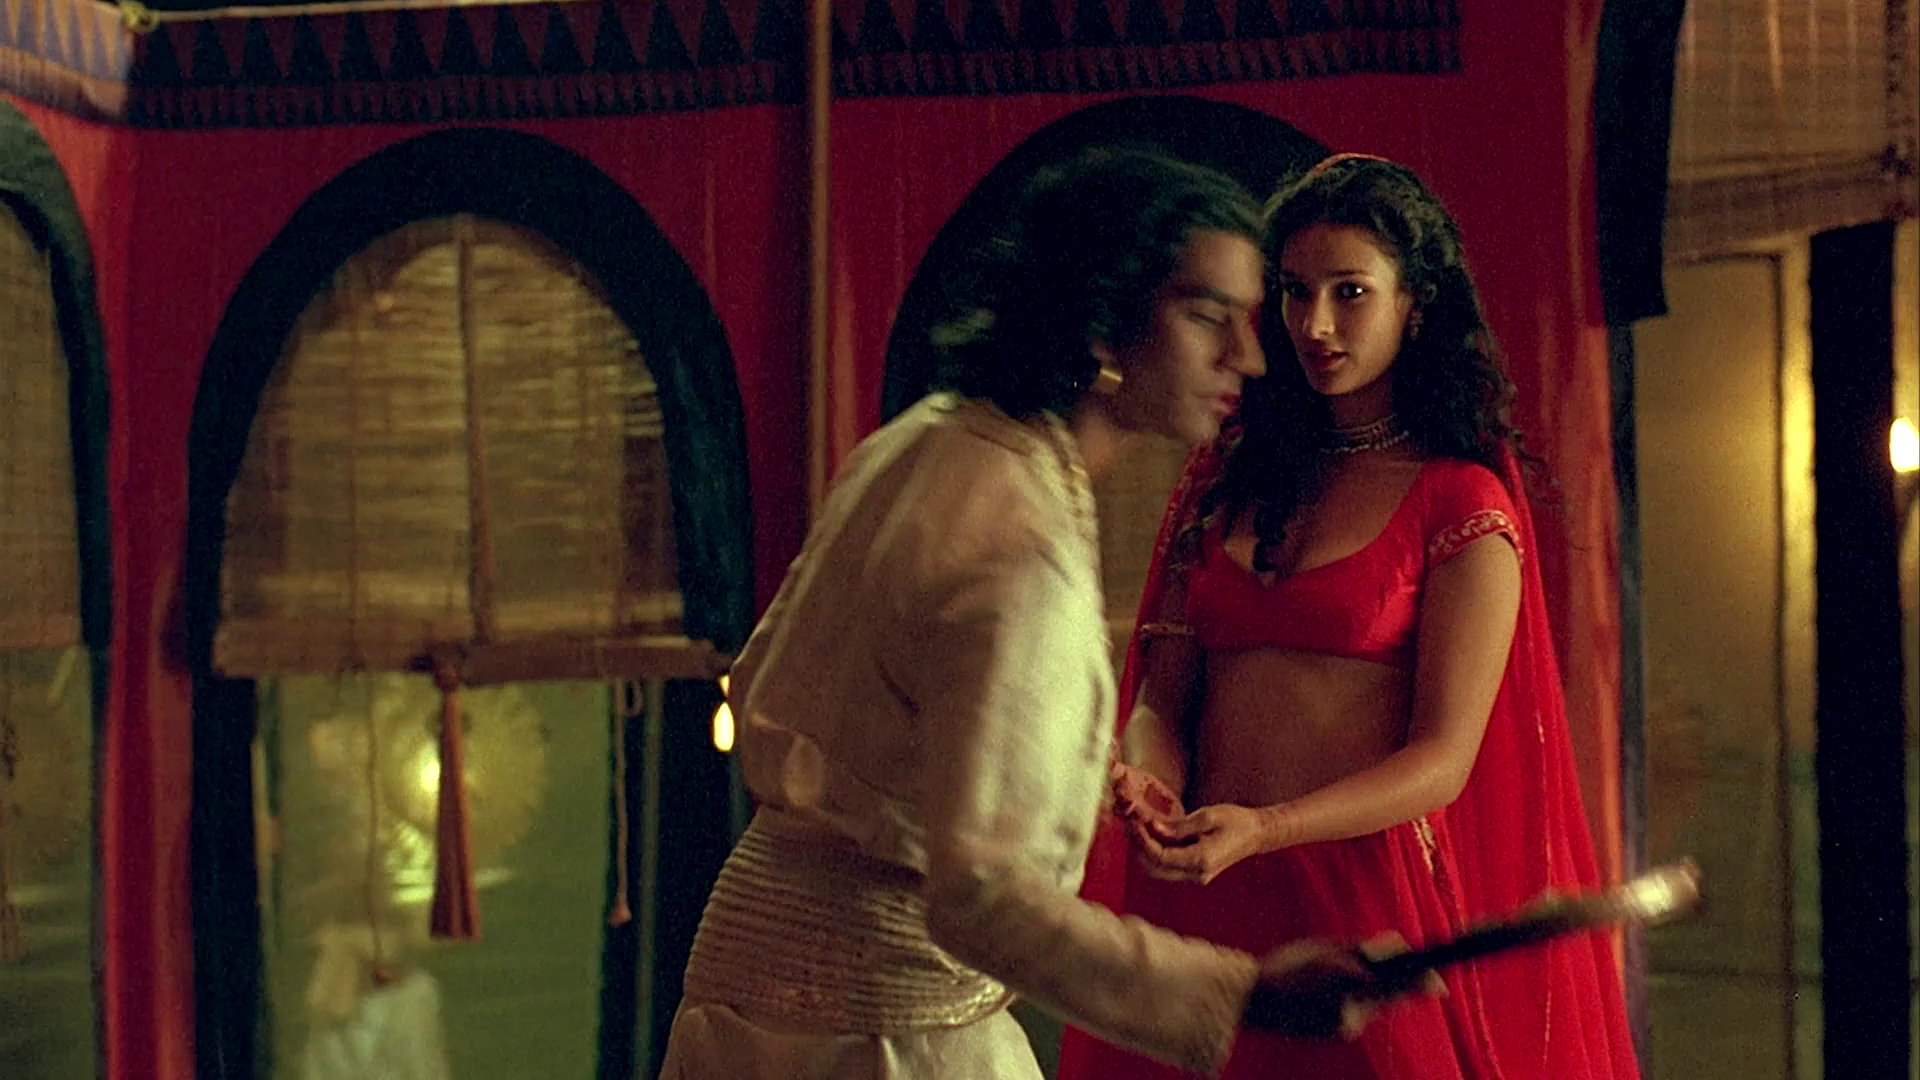 ǻ/ձ Kama.Sutra.A.Tale.of.Love.1996.1080p.BluRay.x264.DTS-FGT 9.32GB-3.png